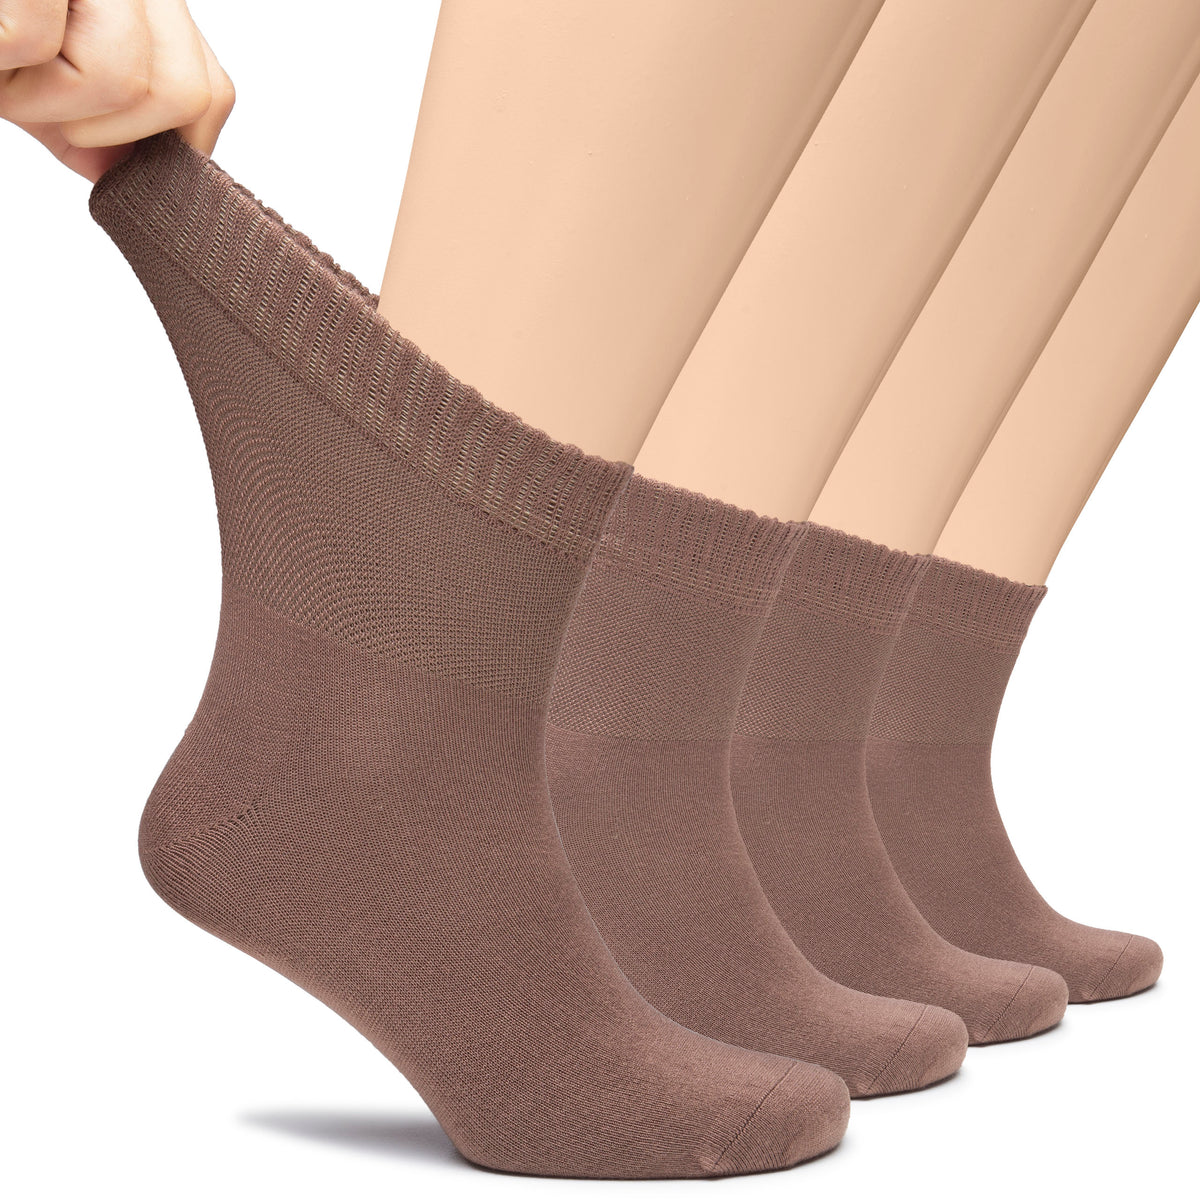 This image depicts a pair of brown socks on a man's feet. The socks are Men's Bamboo Diabetic Socks, designed for comfort and support.